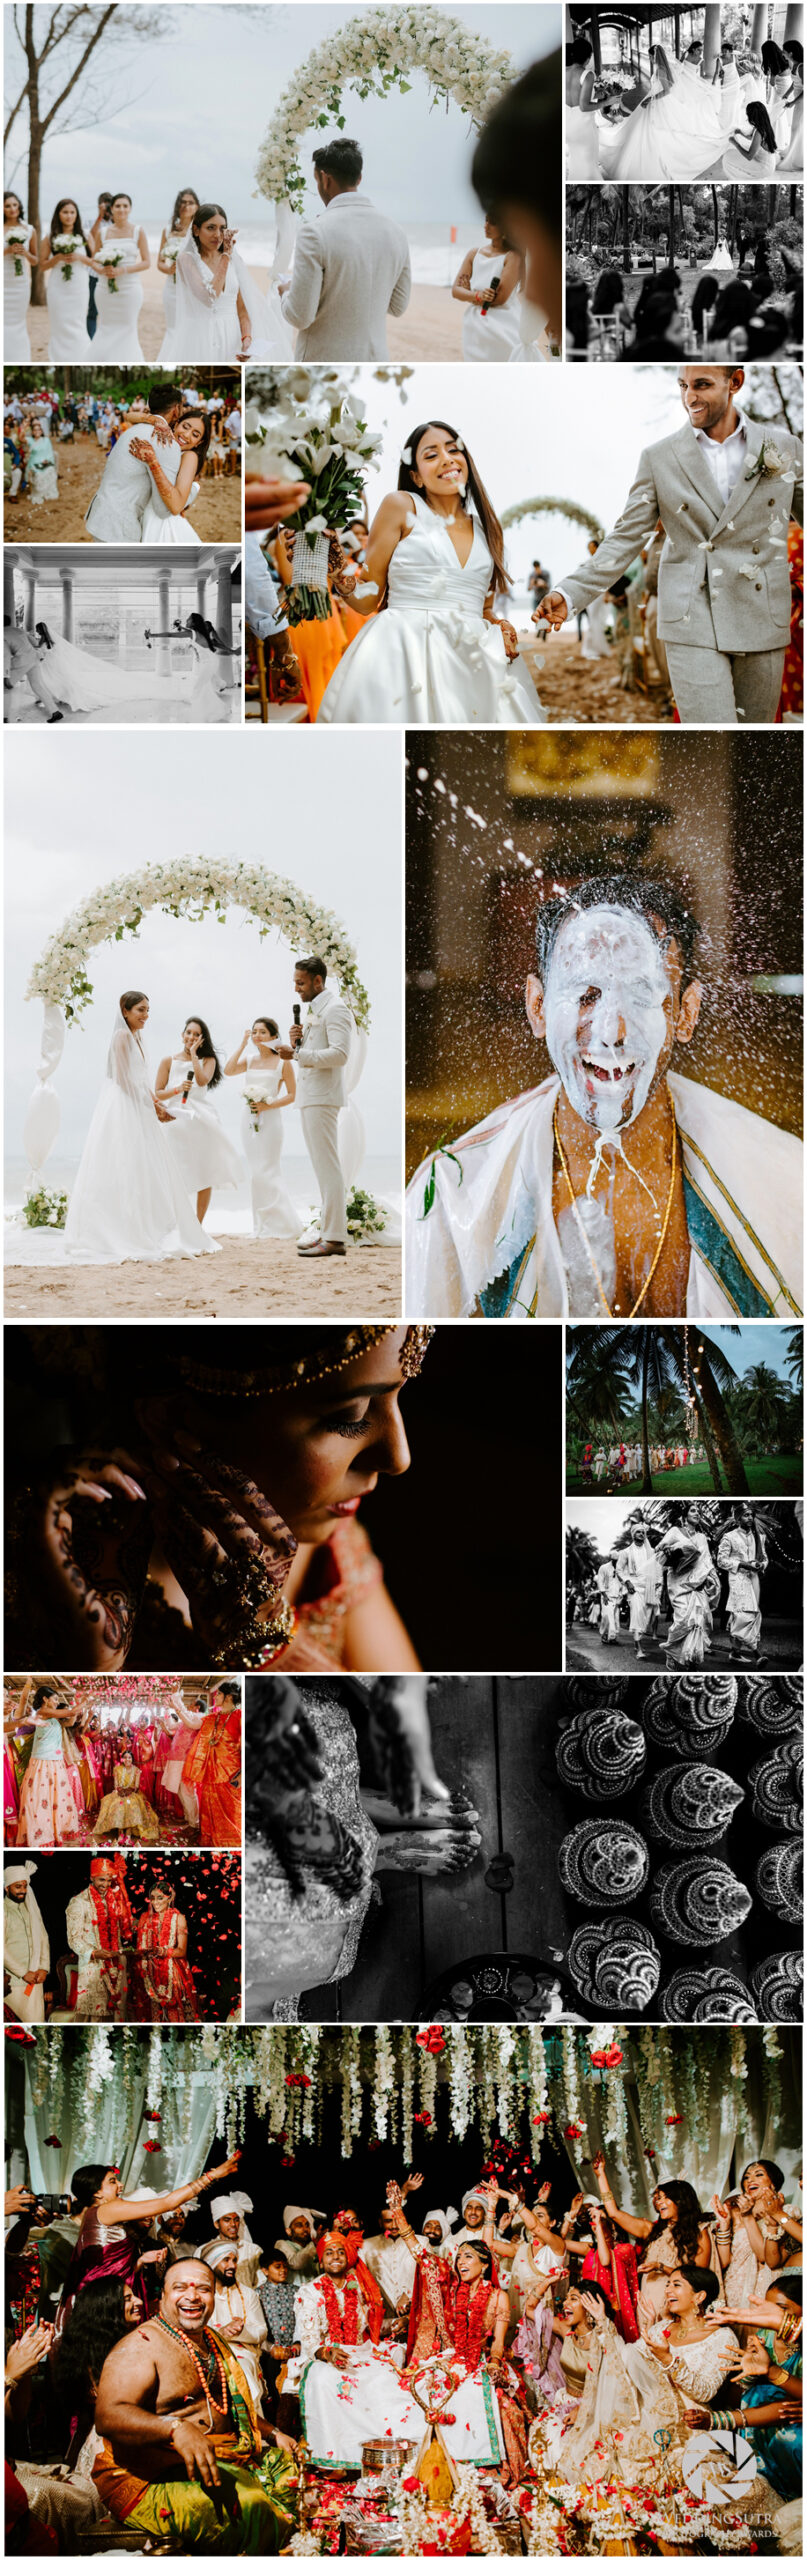 Photography Honours 2021 - Wedding Professional photographer Of The Year